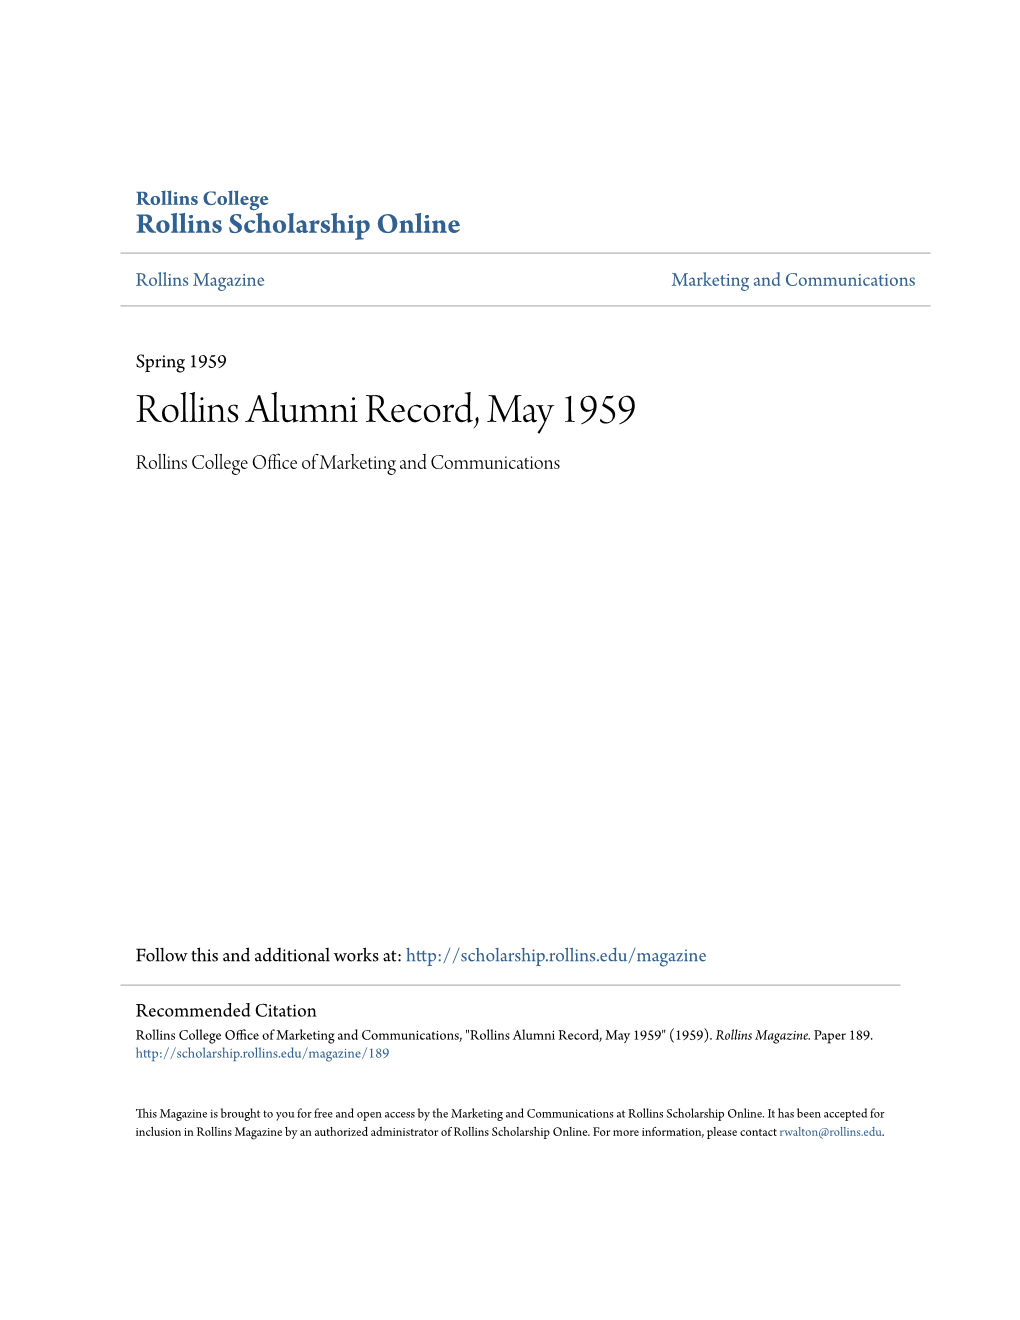 Rollins Alumni Record, May 1959 Rollins College Office Ofa M Rketing and Communications